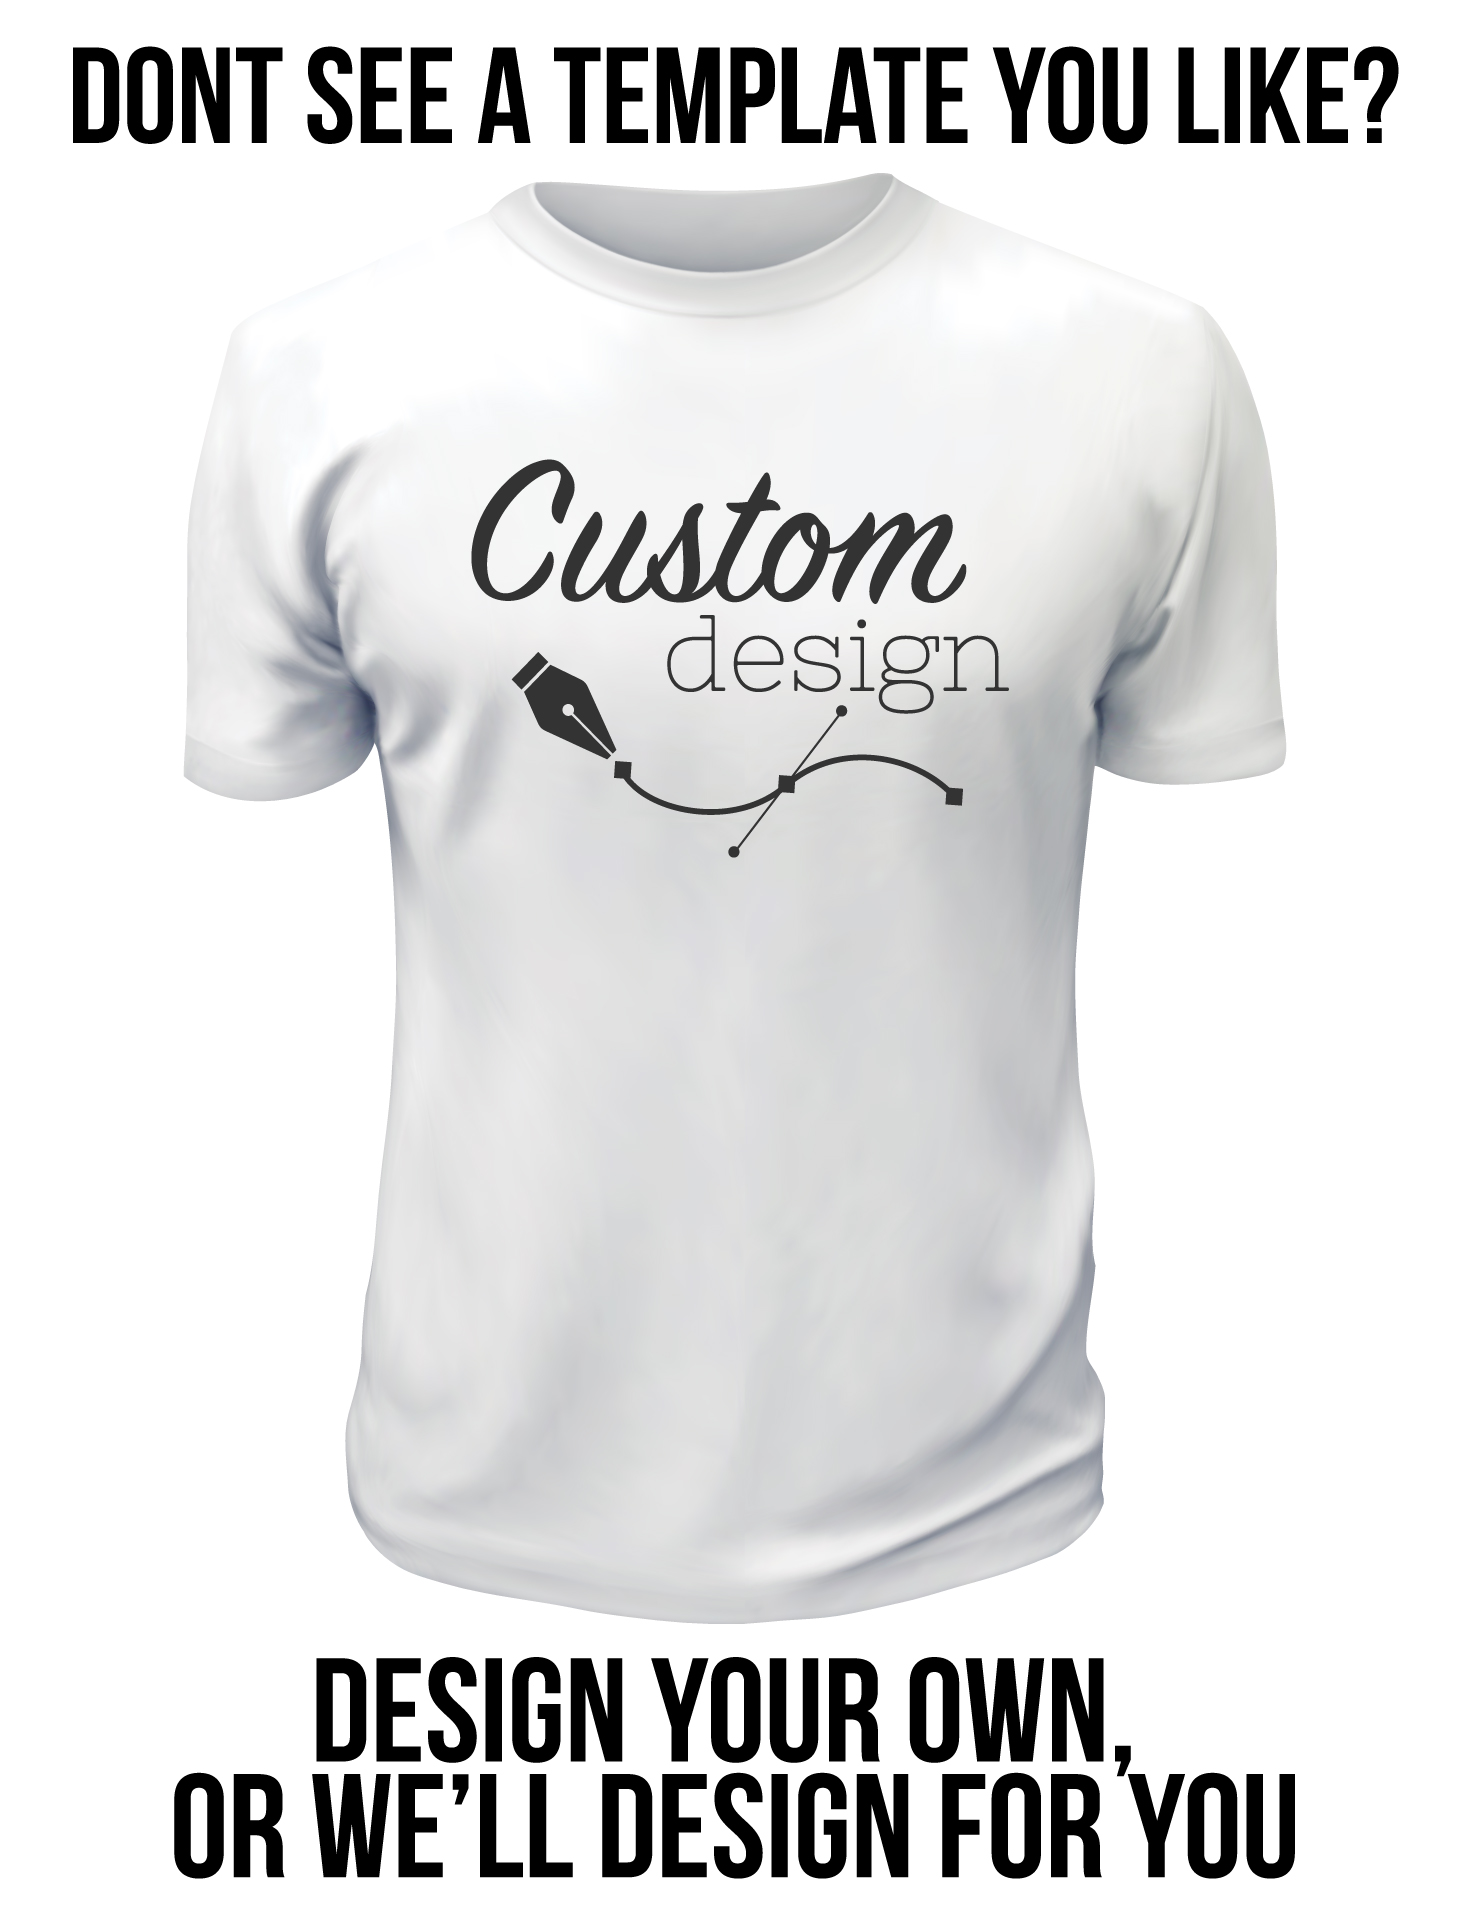 Bulk Prices, Customize Your Own Shirt with Text, Wholesale T-Shirts, Personalized T-Shirt, Custom Text, Custom Text, T-Shirt Design Bundle